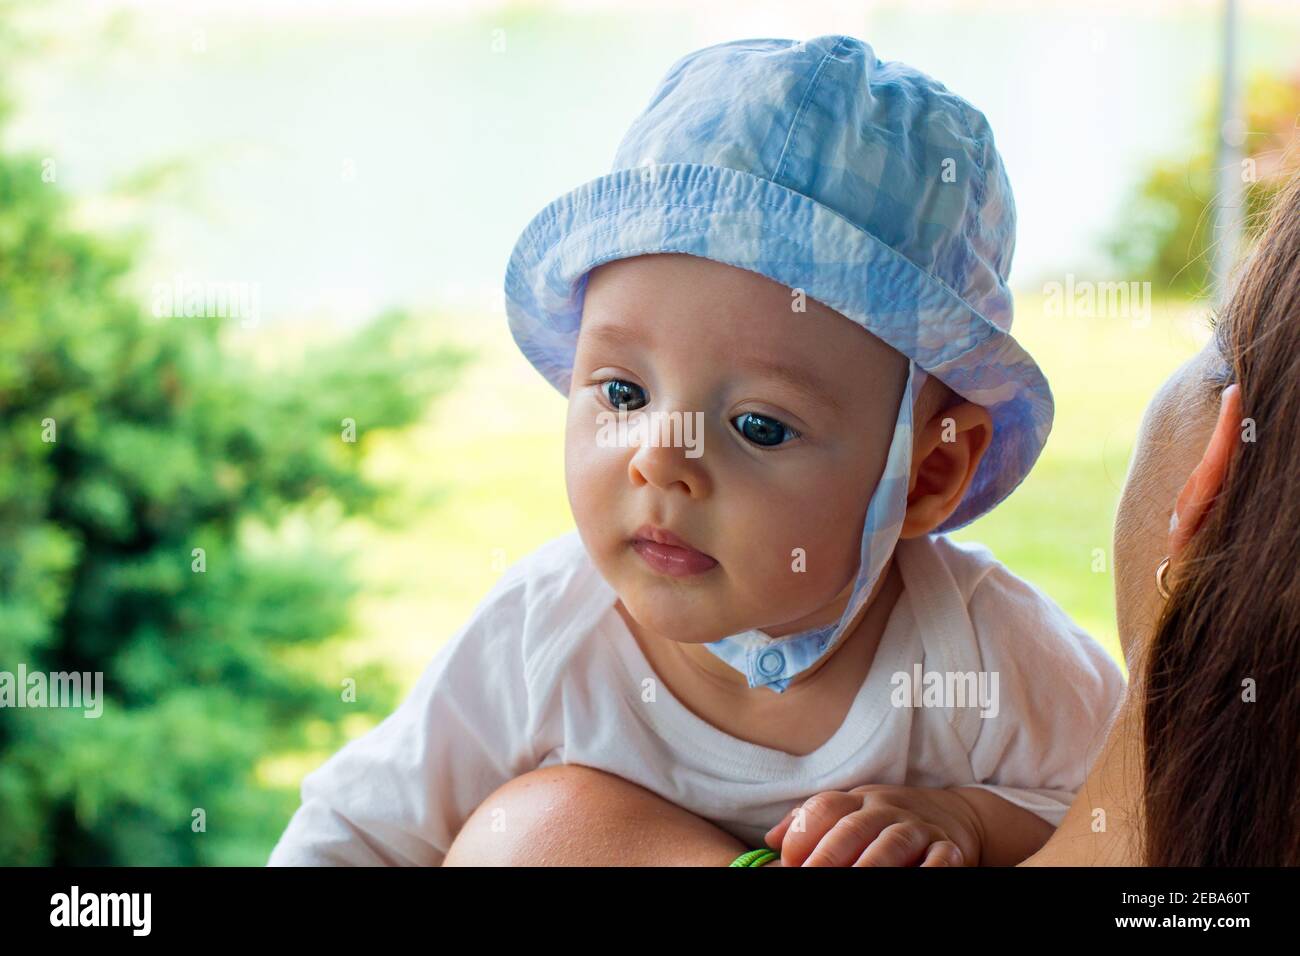 Intelligent infant face expression close up portrait, baby in cap on little head with fascinated face and focused blue eyes Stock Photo